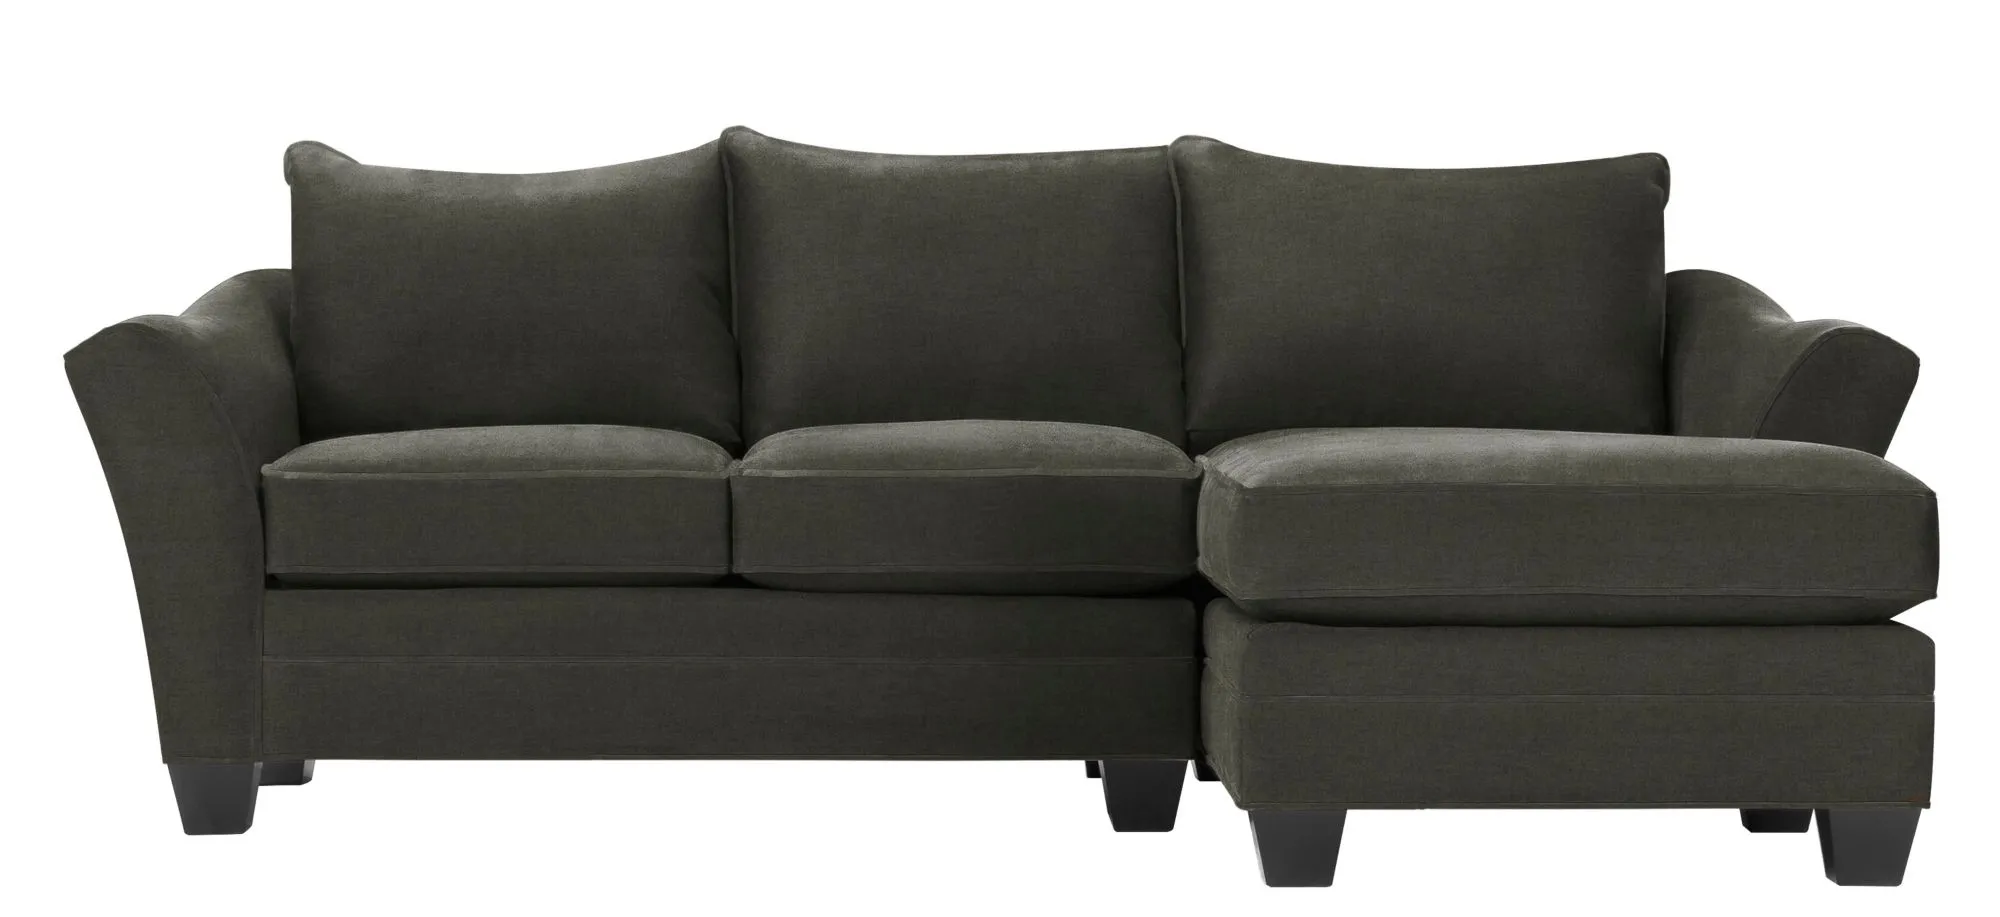 Foresthill 2-pc. Right Hand Chaise Sectional Sofa in Santa Rosa Slate by H.M. Richards